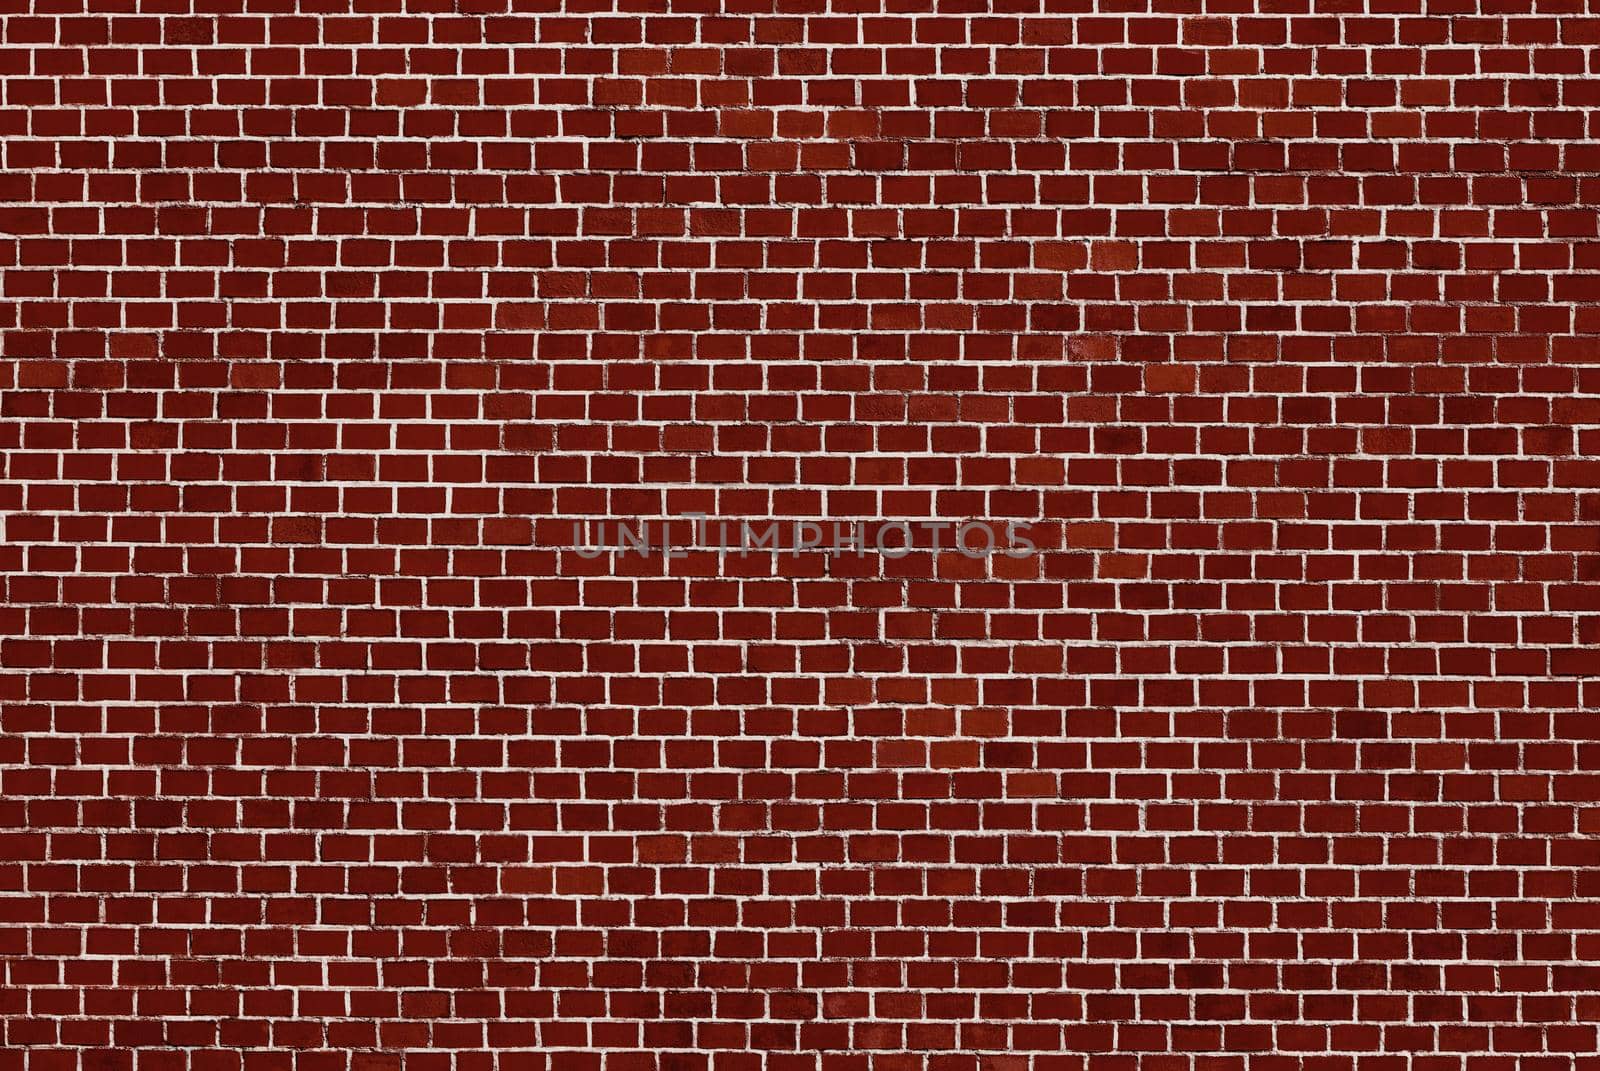 Old Red Brick Wall. An ancient fortress. Medieval red brick building. Big Brick wall background texture.